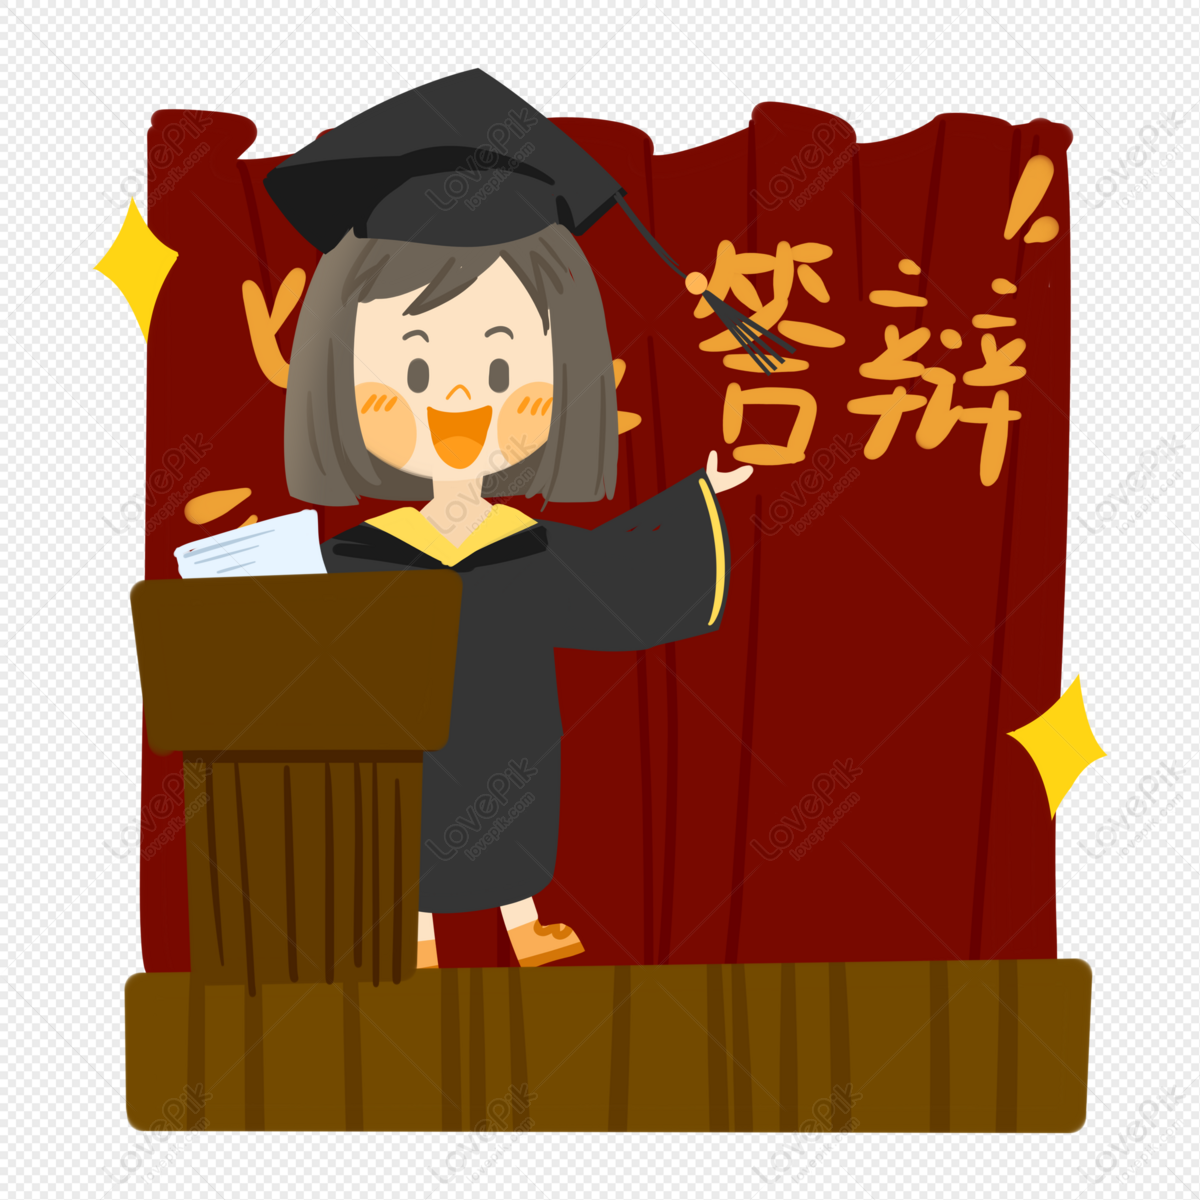 Cartoon Girl On Graduation Stage PNG Picture And Clipart Image For Free  Download - Lovepik | 401229035